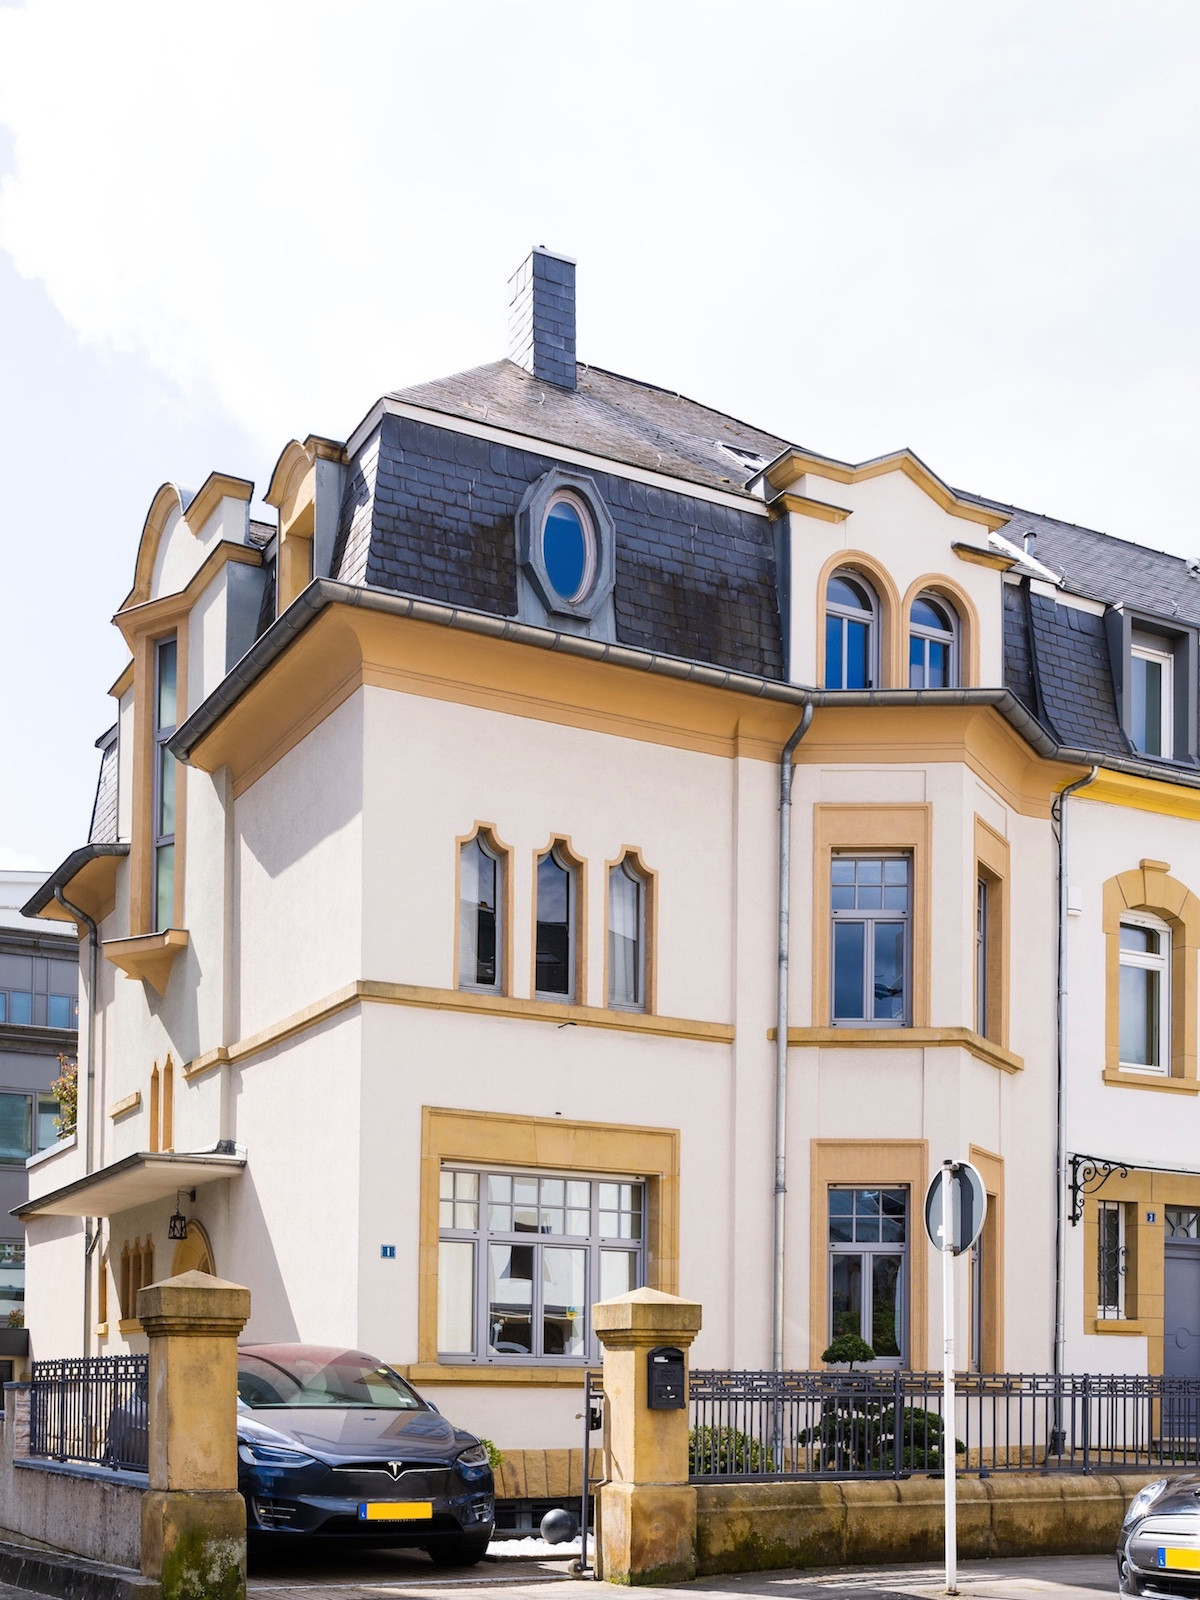 Aatika Hayat and her husband restored this 1920s townhouse in Hollerich. Photo provided by Aatika Hayat